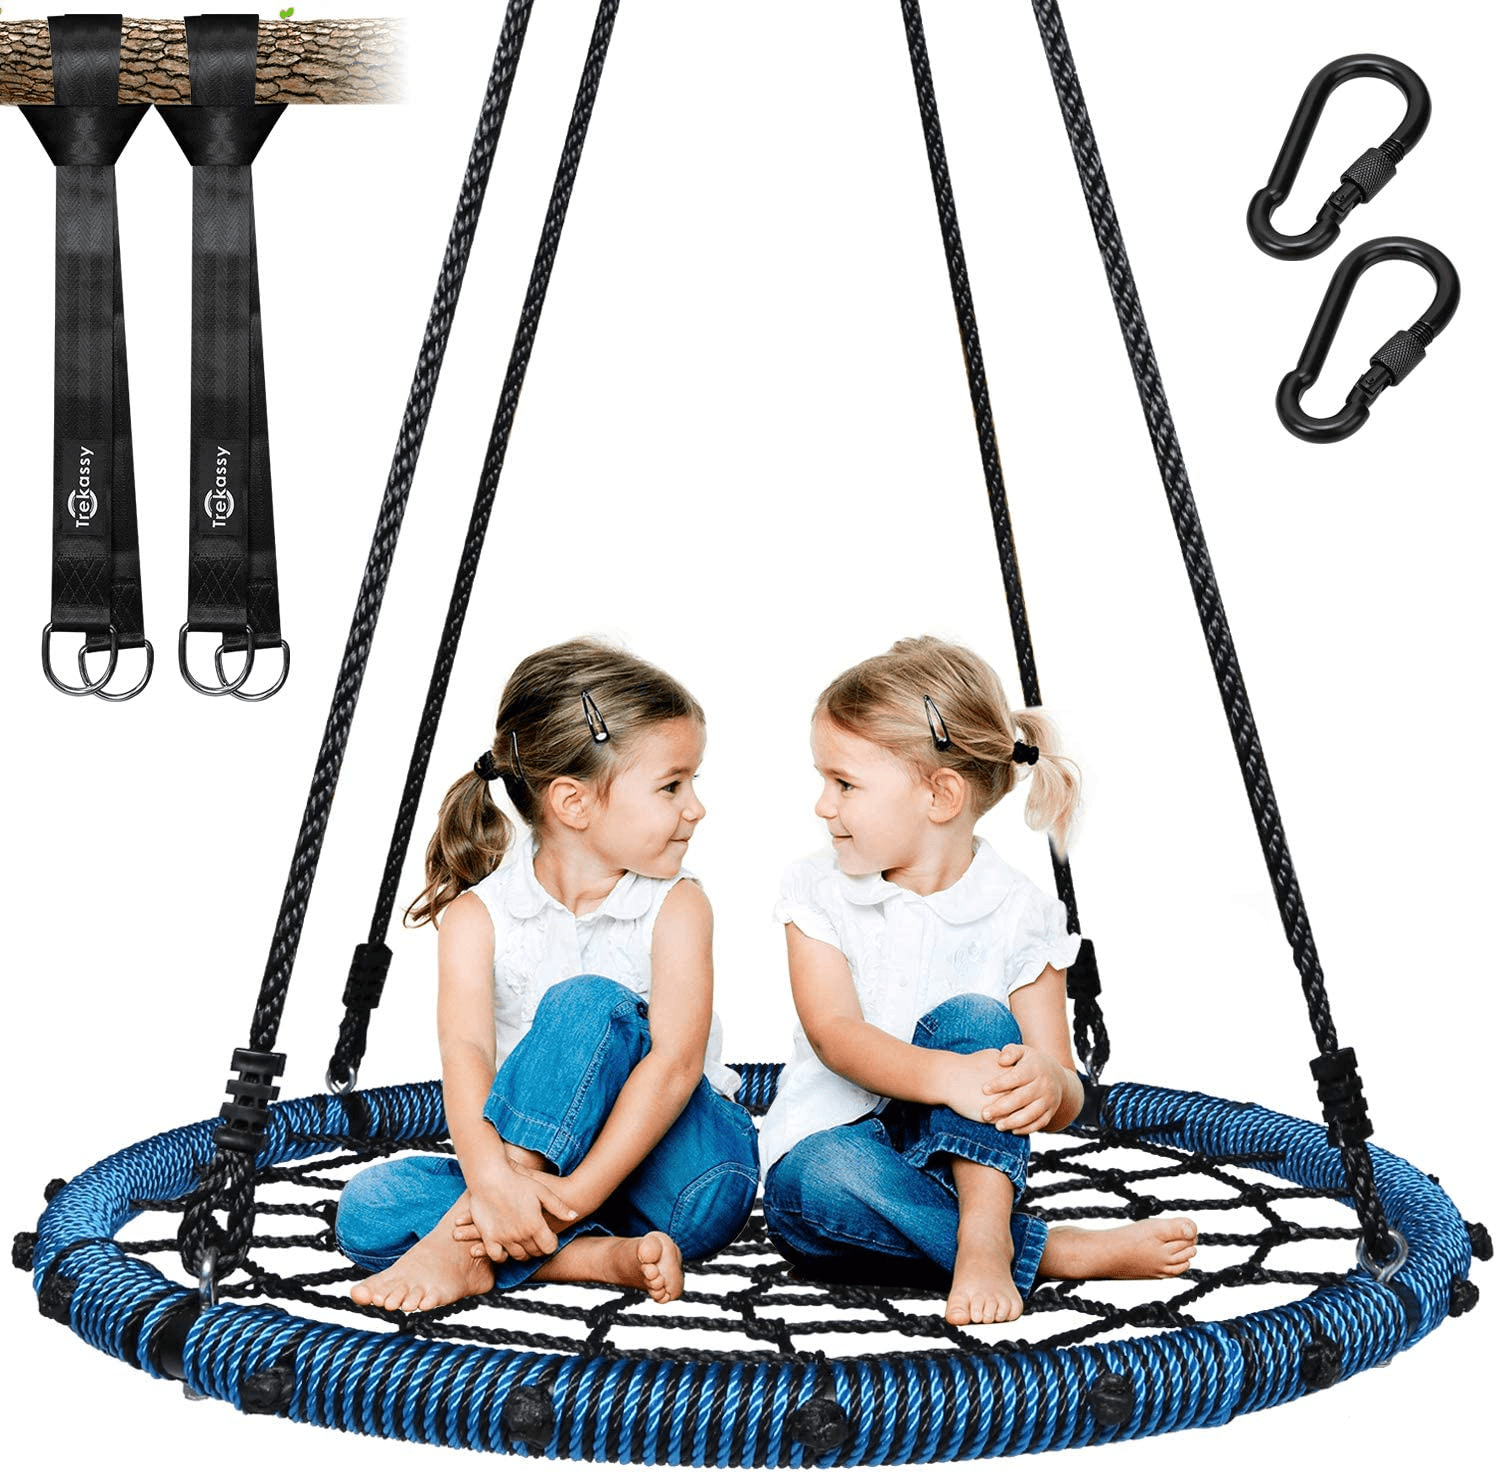 2pcs 10ft Tree Hanging Straps Trekassy 700lb 40 Inch Saucer Tree Swing for Kids Adults 900D Oxford Waterproof with Swivel Steel Frame and Adjustable Ropes--Blue 